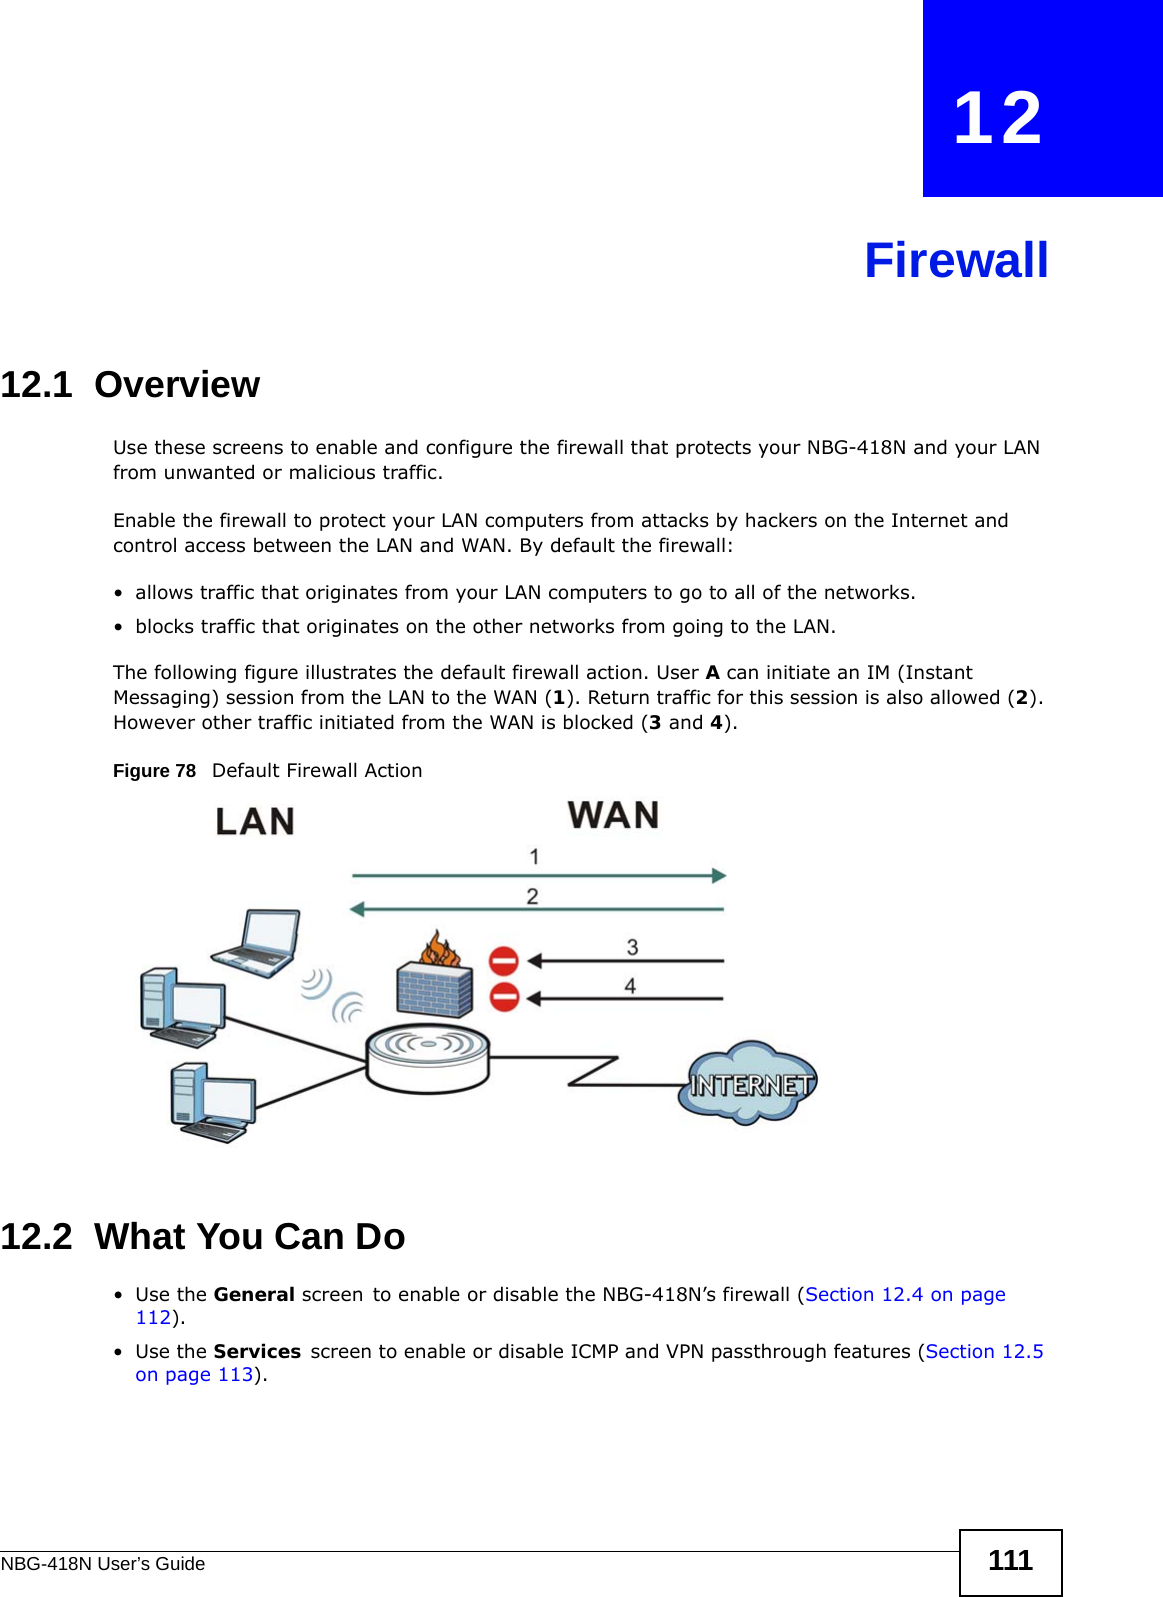 NBG-418N User’s Guide 111CHAPTER   12Firewall12.1  Overview   Use these screens to enable and configure the firewall that protects your NBG-418N and your LAN from unwanted or malicious traffic.Enable the firewall to protect your LAN computers from attacks by hackers on the Internet and control access between the LAN and WAN. By default the firewall:• allows traffic that originates from your LAN computers to go to all of the networks. • blocks traffic that originates on the other networks from going to the LAN. The following figure illustrates the default firewall action. User A can initiate an IM (Instant Messaging) session from the LAN to the WAN (1). Return traffic for this session is also allowed (2). However other traffic initiated from the WAN is blocked (3 and 4).Figure 78   Default Firewall Action12.2  What You Can Do•Use the General screen to enable or disable the NBG-418N’s firewall (Section 12.4 on page 112).•Use the Services screen to enable or disable ICMP and VPN passthrough features (Section 12.5 on page 113).